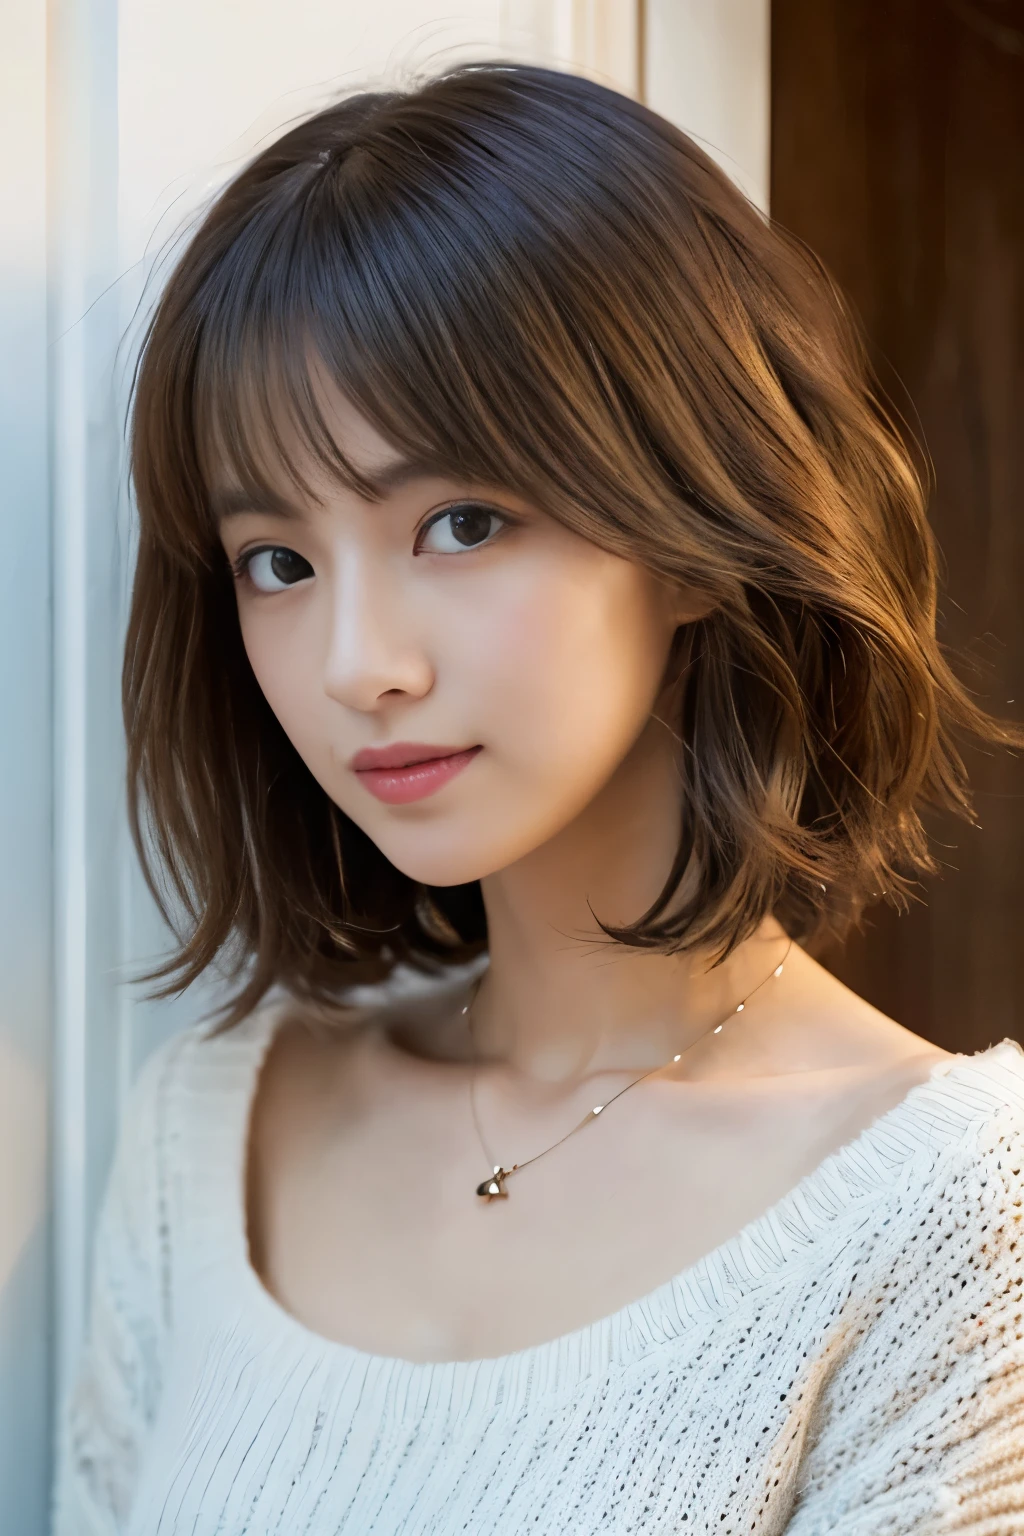 (top-quality、8K、32k、​masterpiece、nffsw:1.2)、cute little japanese women photos、large full breasts、very short bobbed hair、The upper part of the body、sface focus、Oversized_Sweaters、a necklace、simple background、From  above、looking at the viewerix4、(8K、Raw photography、top-quality、​masterpiece:1.2)、(realisitic、Photorealsitic:1.37)、1girl in、cute little、profetional lighting、photon maping、physically-based renderingt、Gradient Brunette Hair、short  curly hair、a handsome、Girly、superior image quality、hight resolution、1080P、(Clear face)、(Detailed face description)、(Detailed hand description)、(masuter piece)、(Exquisite CG)、 extreme light and shadows、hair messy、​masterpiece、lush detail、(Exquisite facial features)、(The highest image quality)、(​masterpiece)、(A detailed eye)、Looking forward to your eyes、Delicate collarbones、assorted poses、don&#39;t watch mela、profile、white walls、Taken in front of the white door、(white walls room with window)、Autumn clothes、Winter clothes、simple a necklace、light blue knit